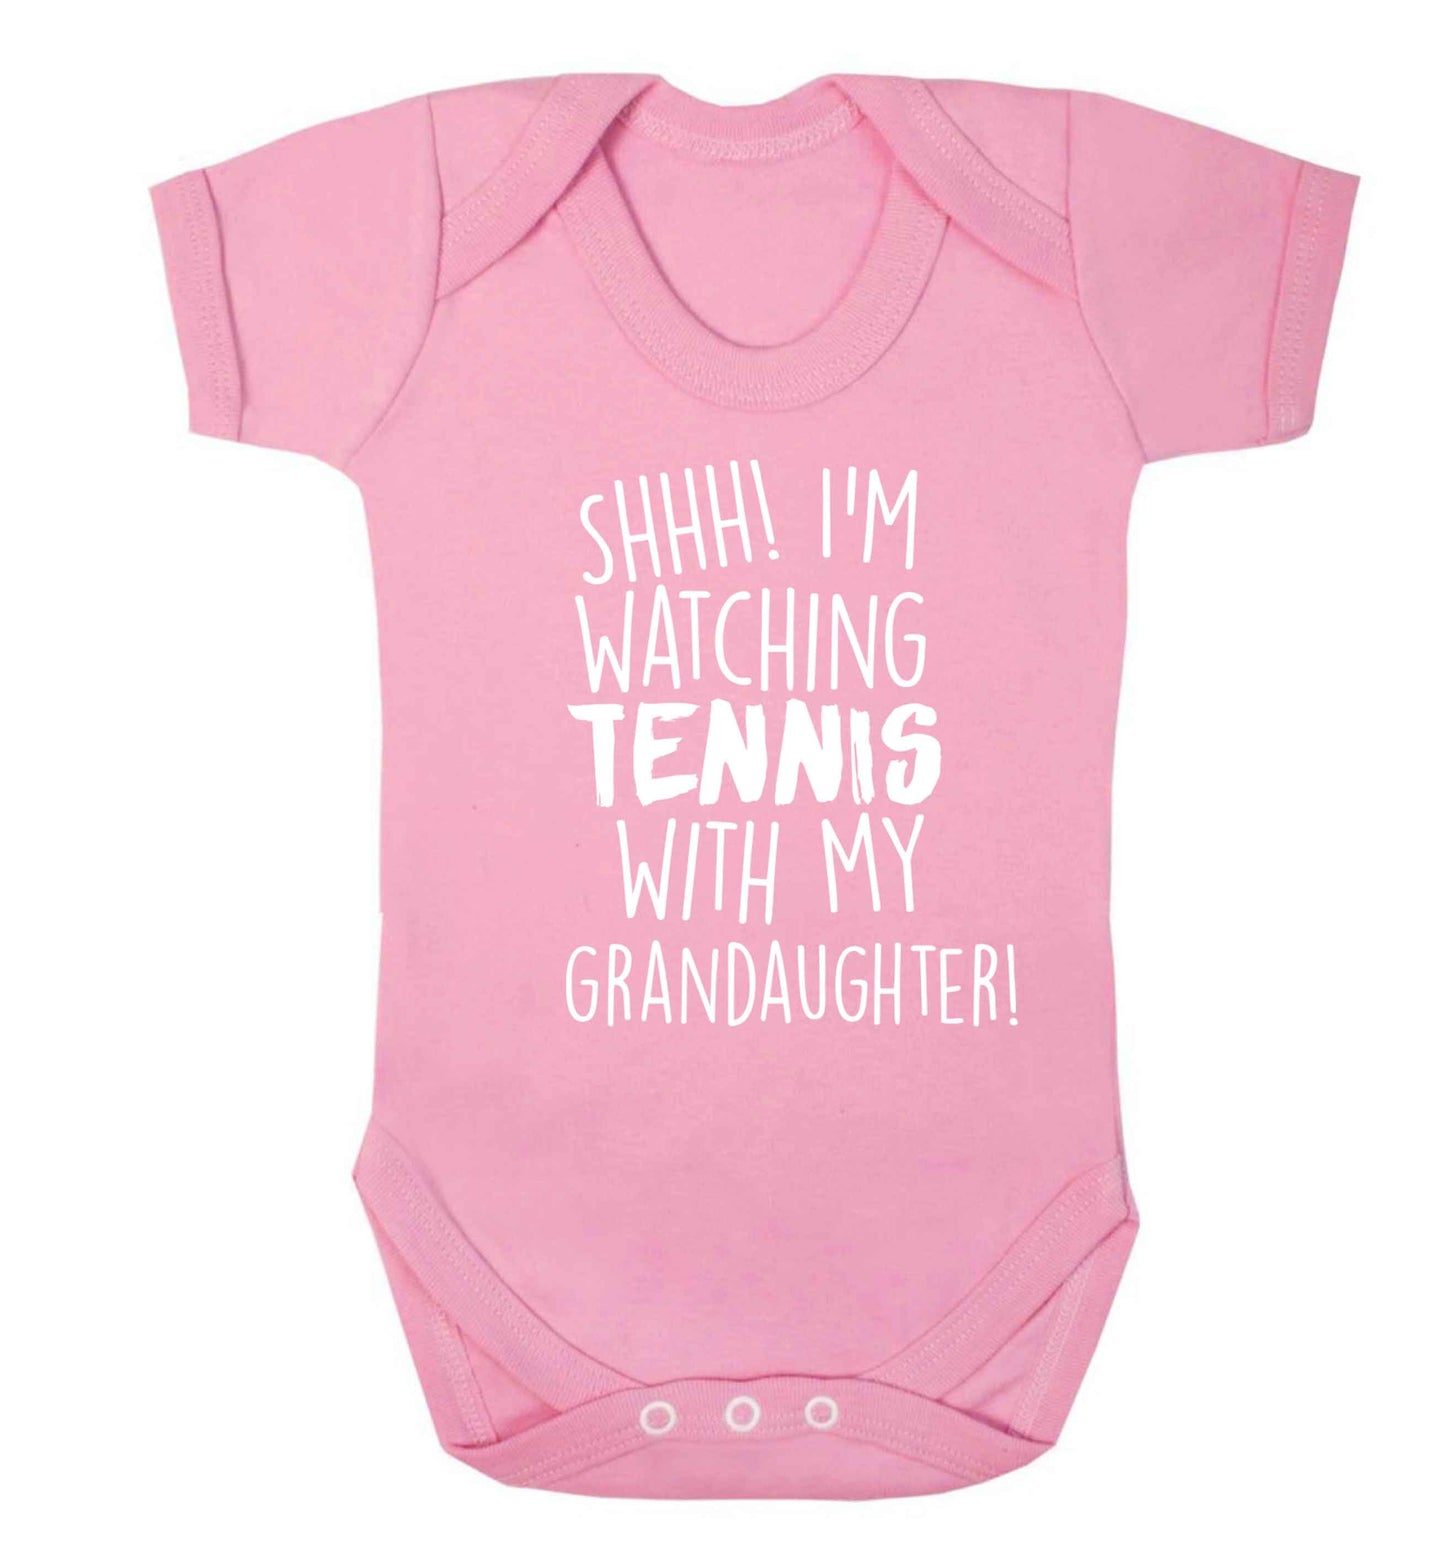 Shh! I'm watching tennis with my granddaughter! Baby Vest pale pink 18-24 months